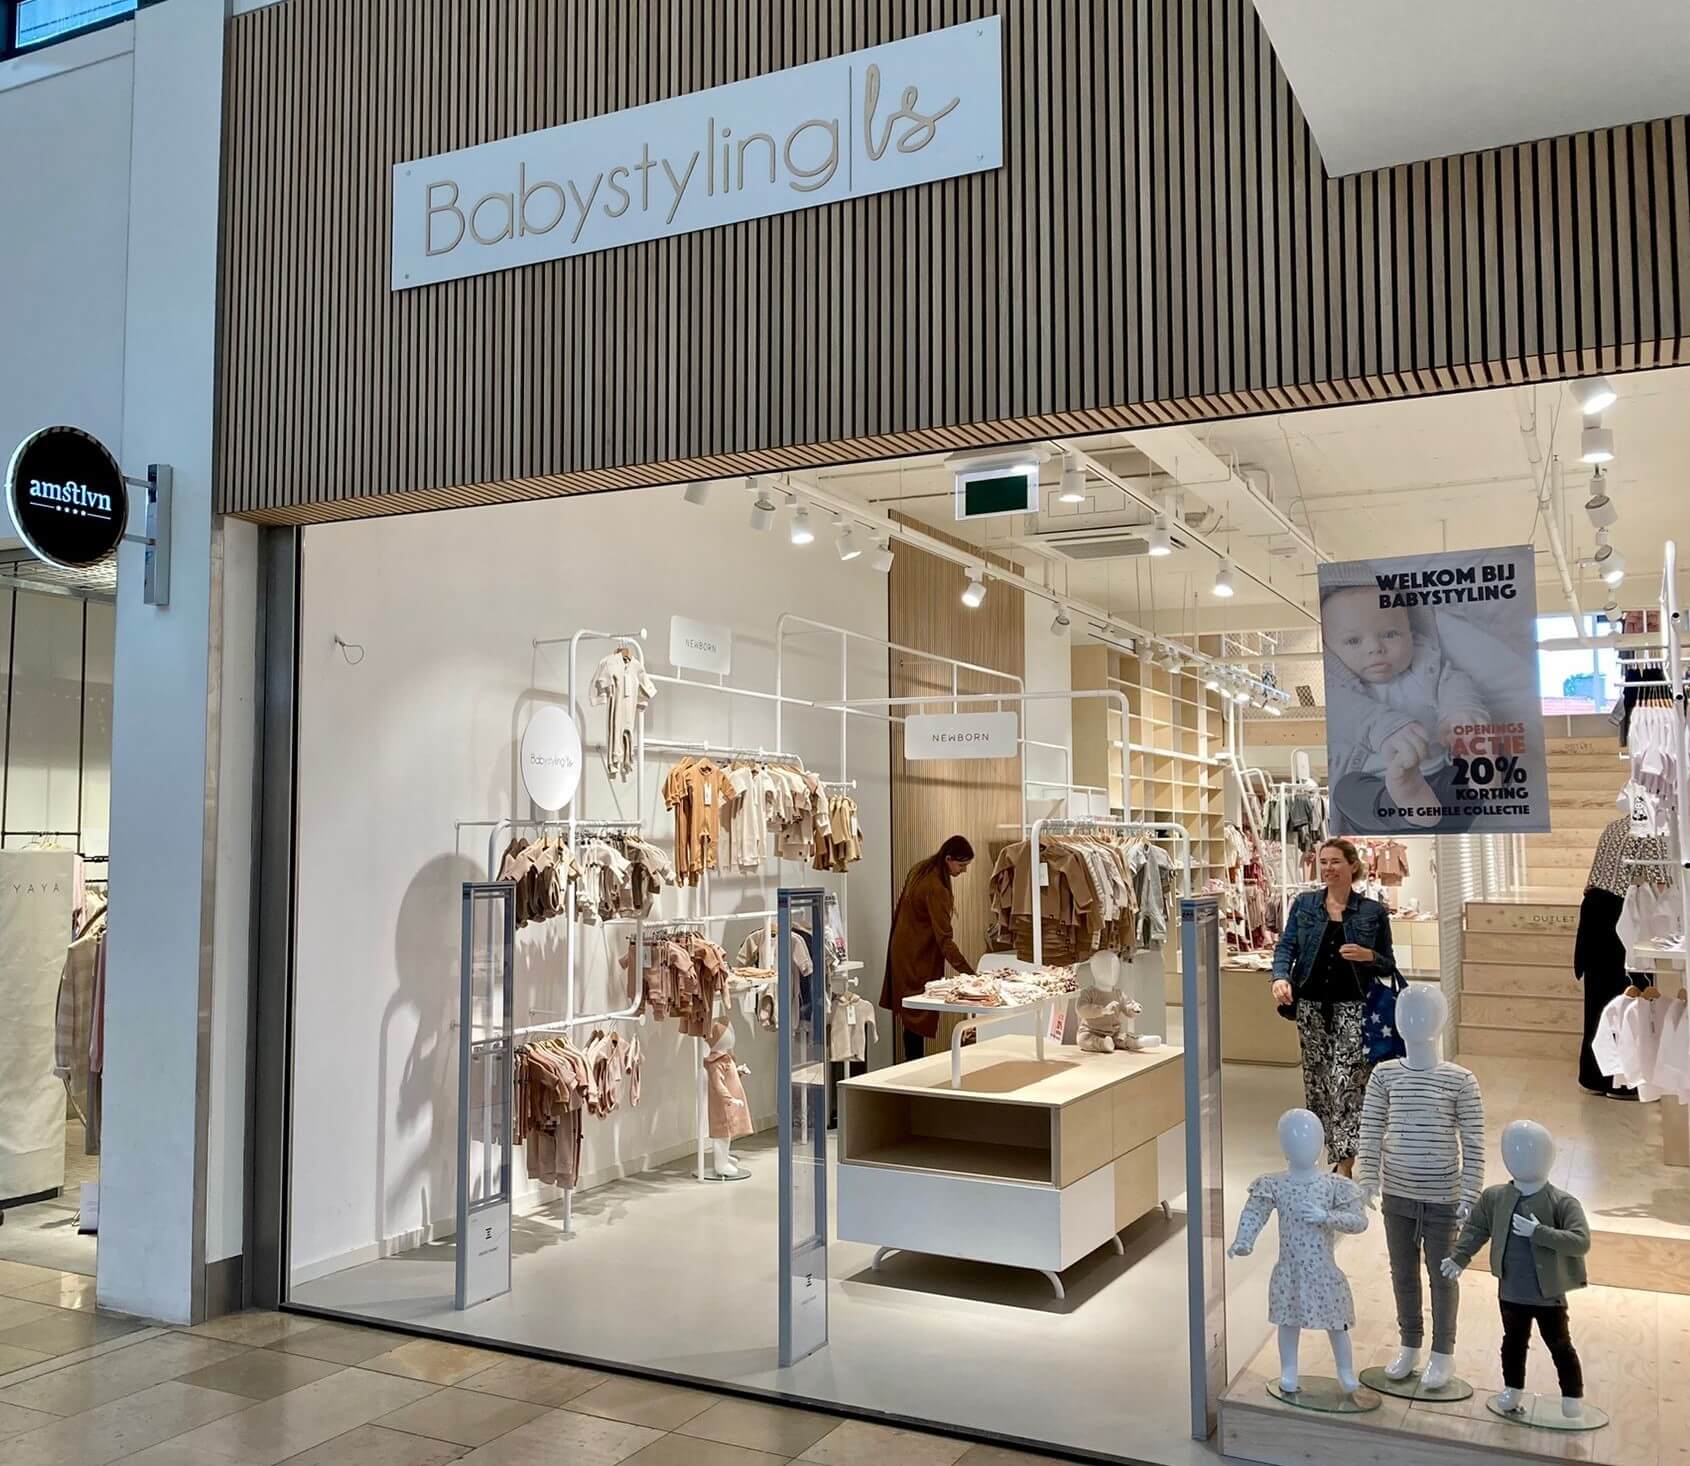 The new Babystyling store at Stadshart Amstelveen